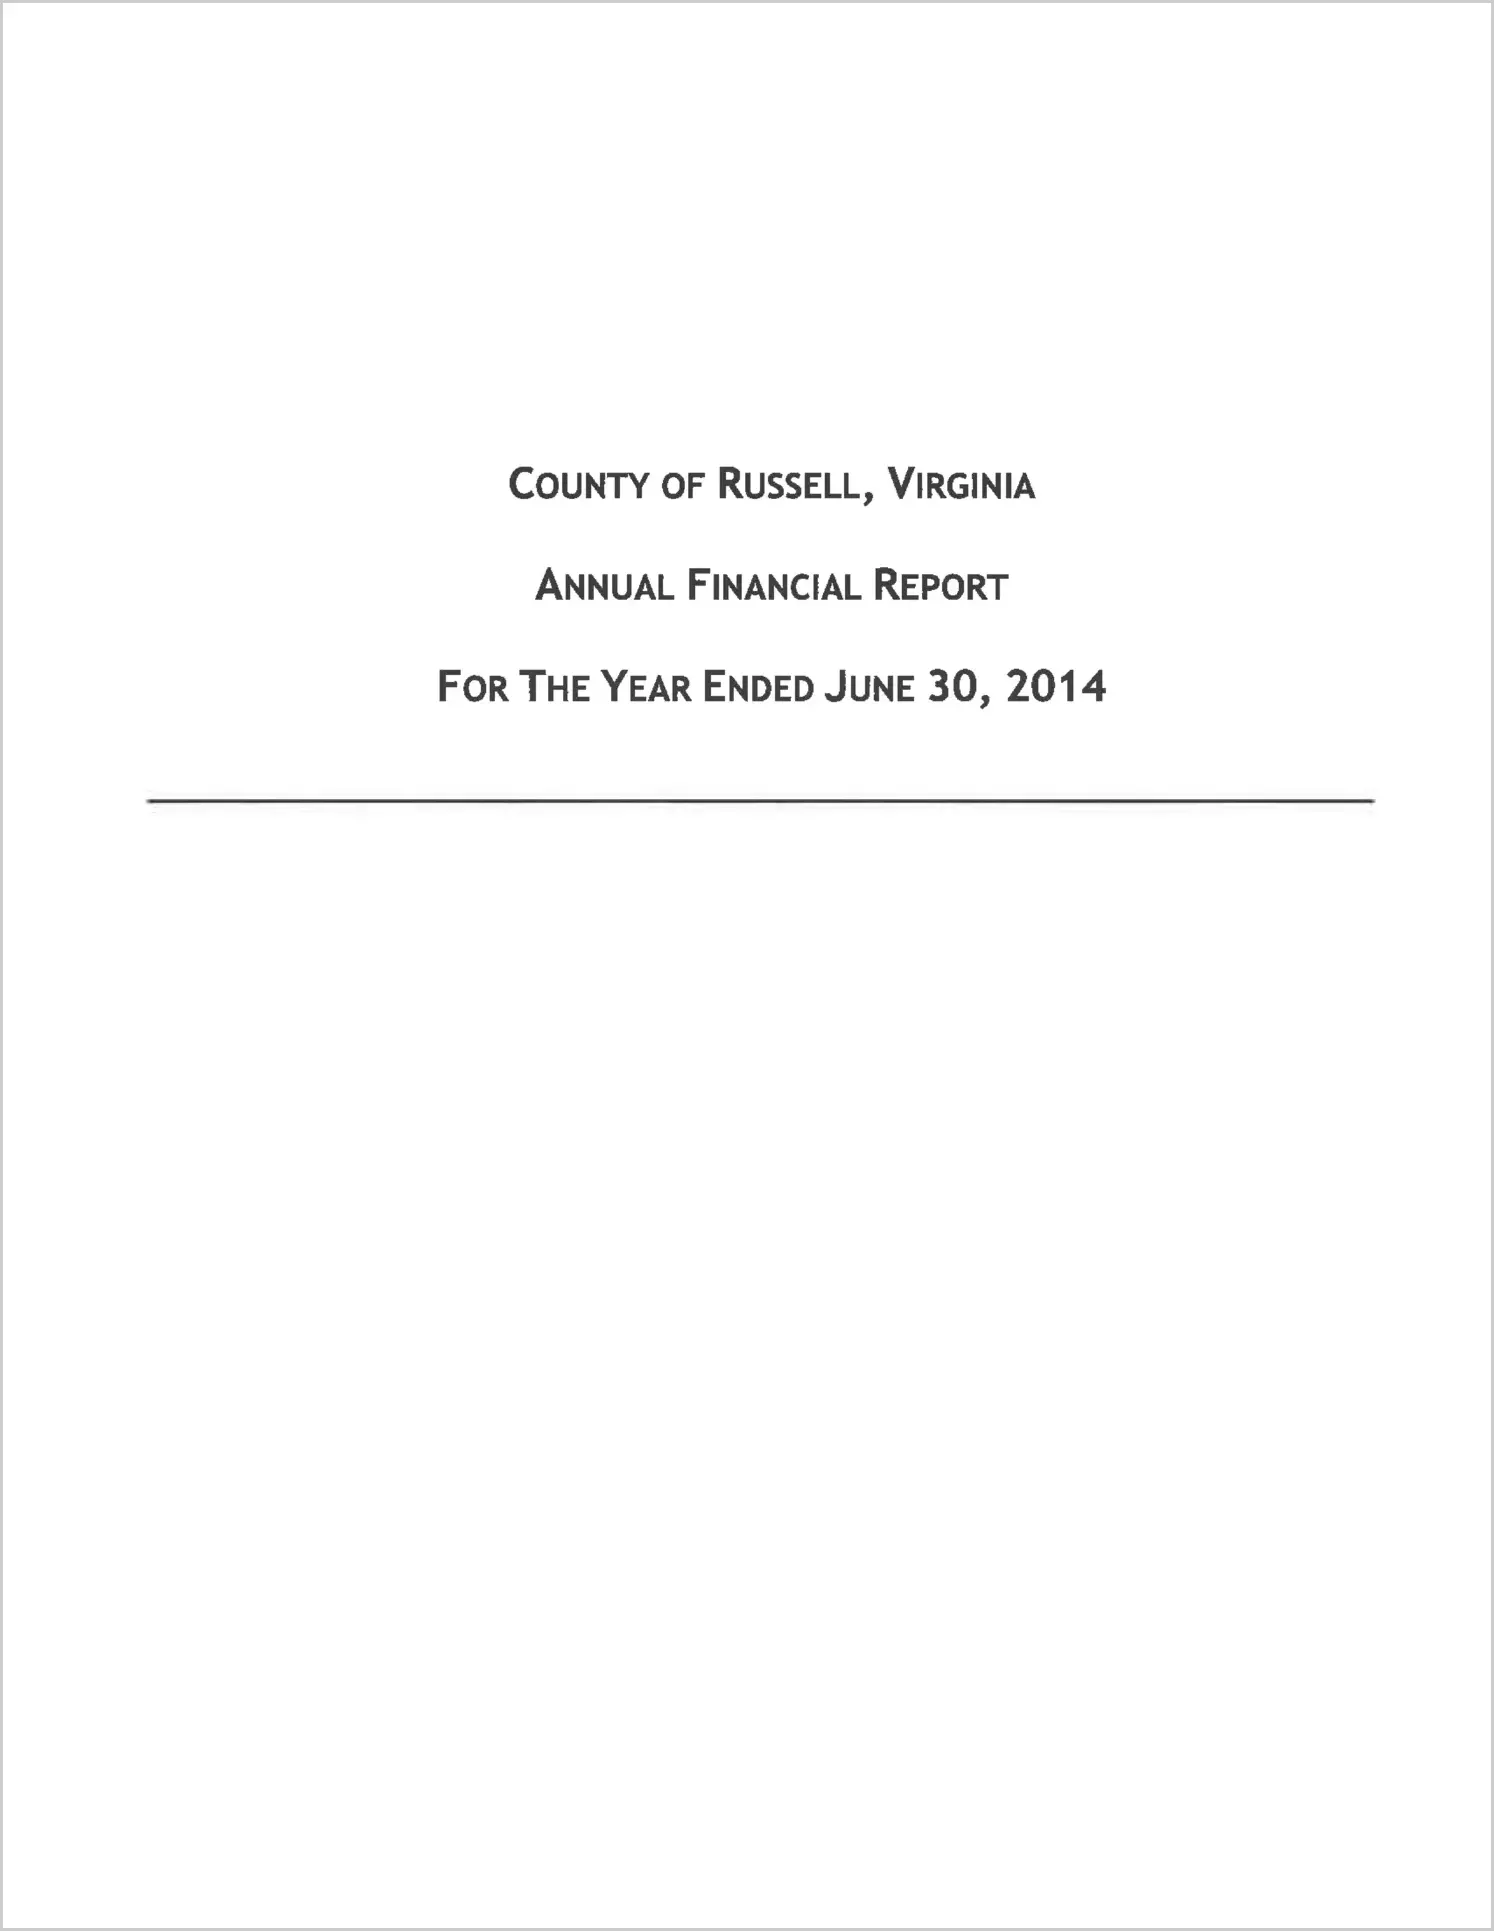 2014 Annual Financial Report for County of Russell